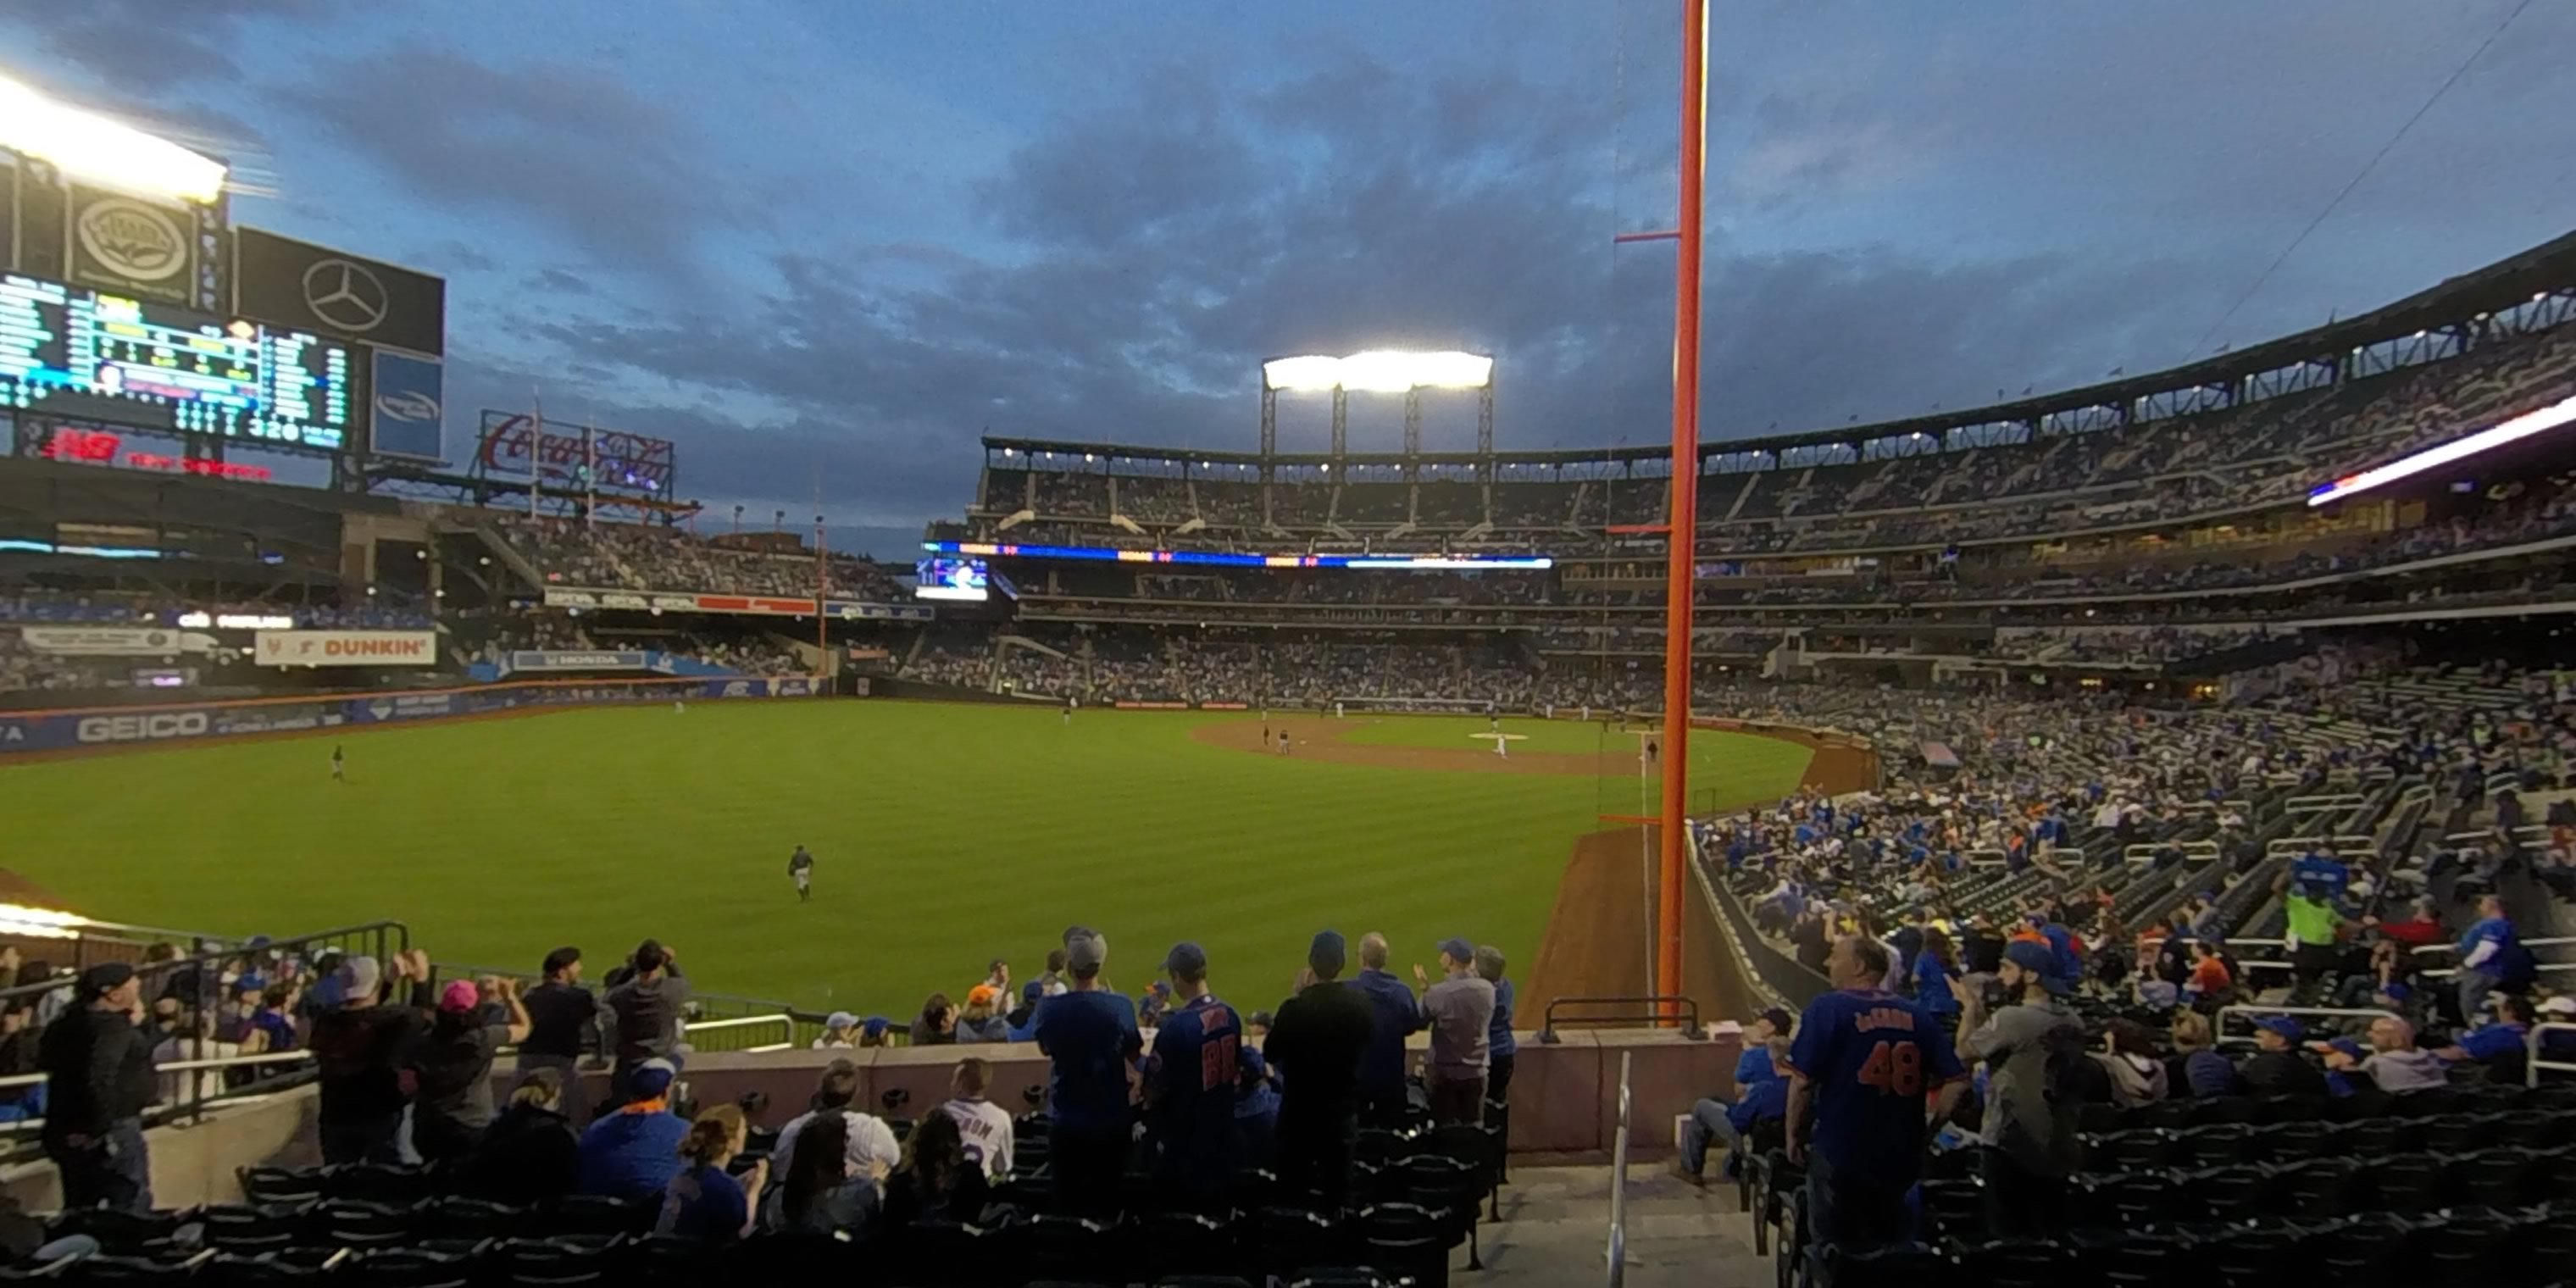 section 131 panoramic seat view  - citi field